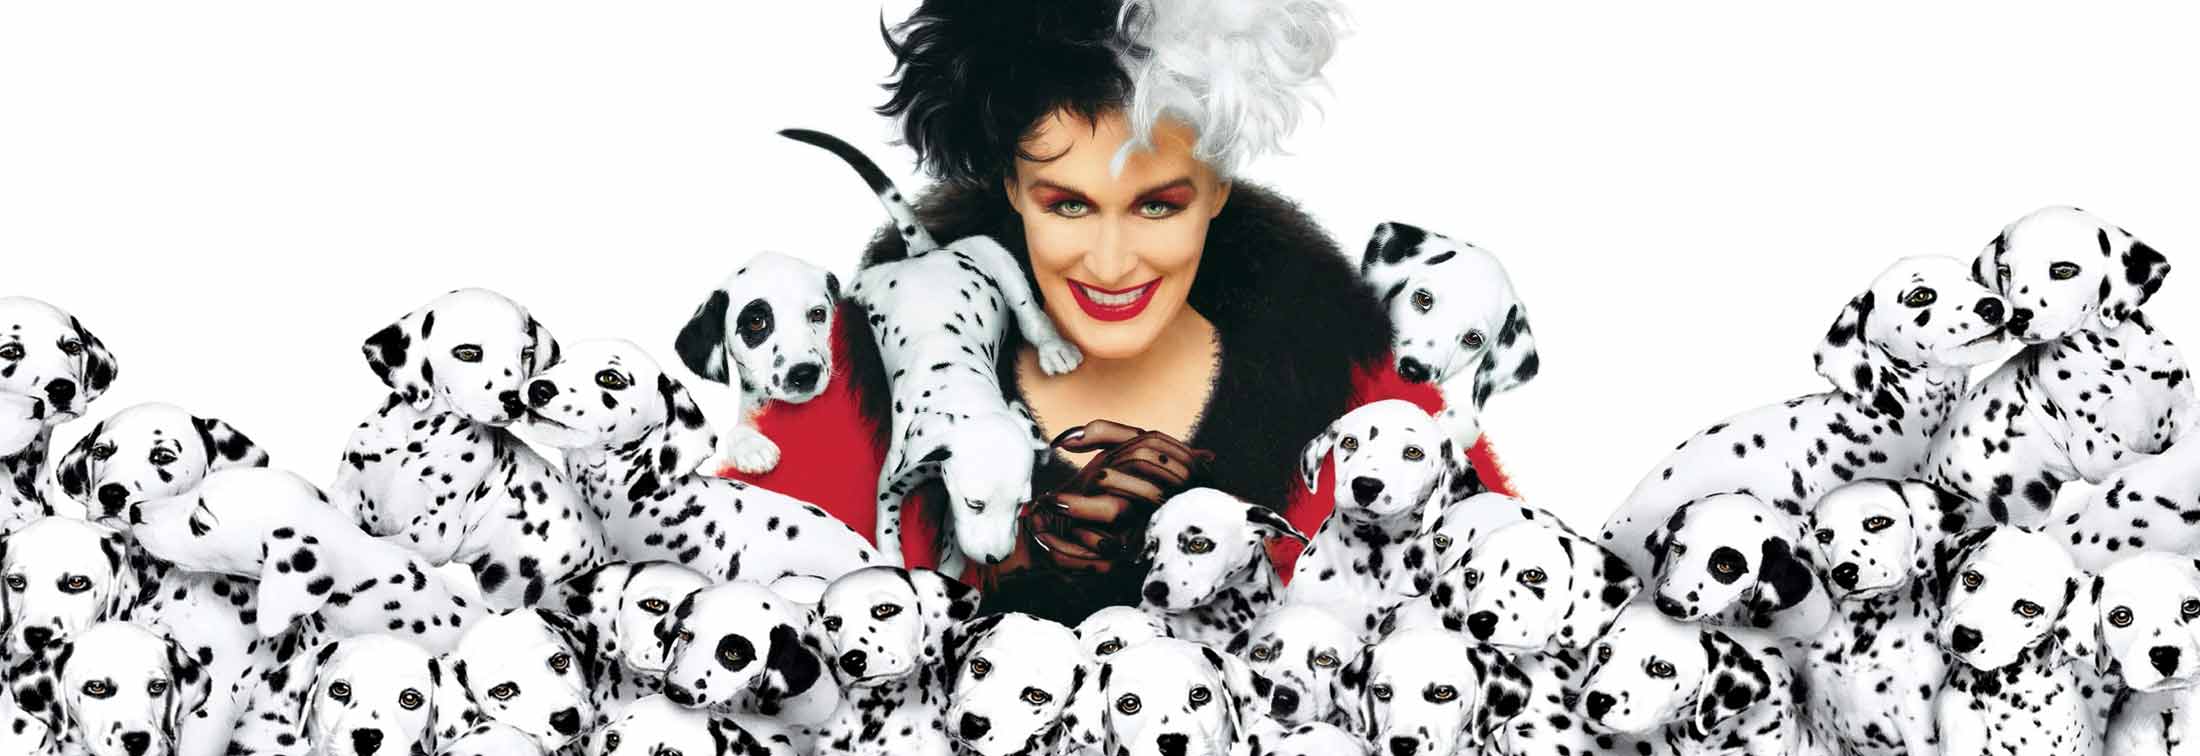 101 Dalmatians review – puppyish enthusiasm can't save a patchy